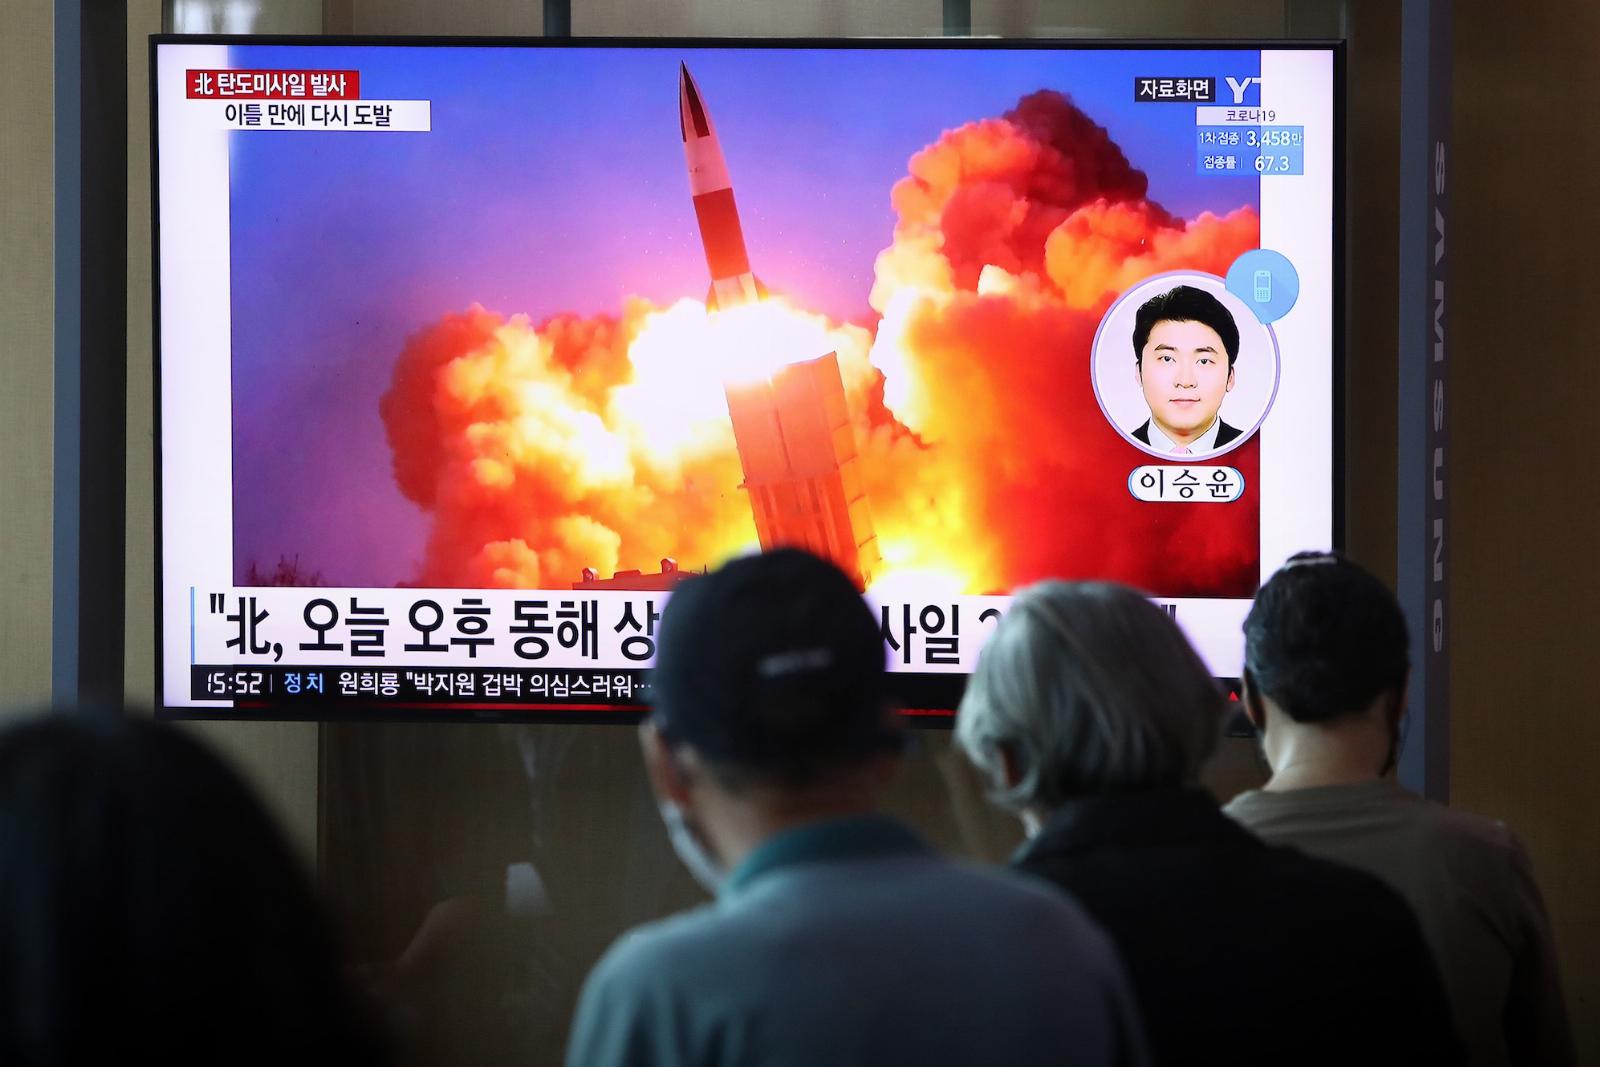 North Korean hackers impersonated journalists to gather intel from academics and think tanks